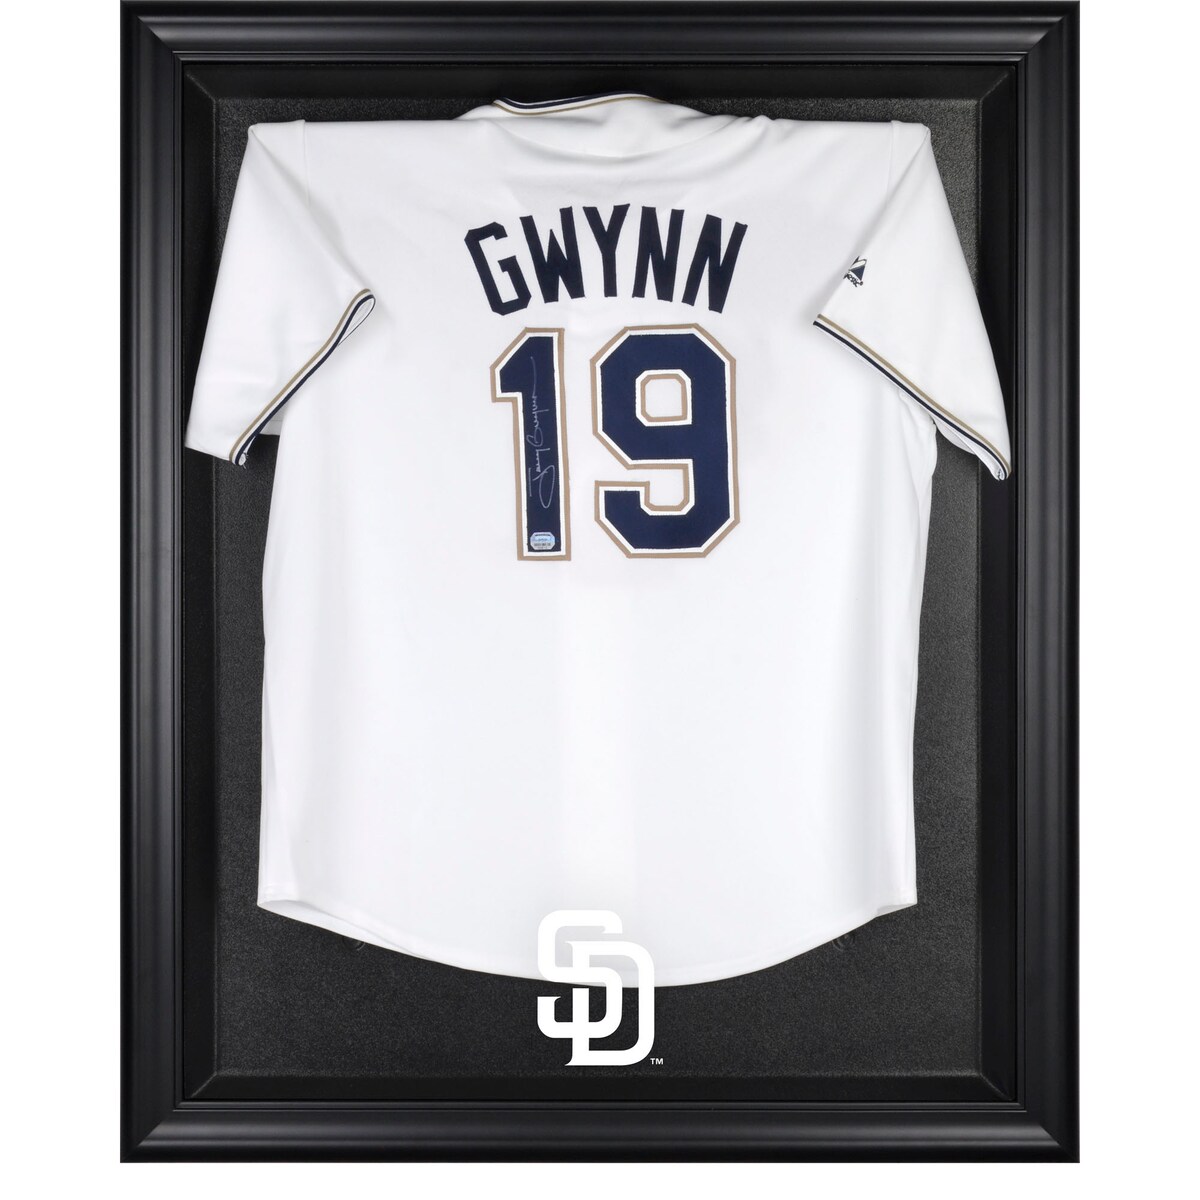 The San Diego Padres black framed logo jersey display case opens on hinges and is easily wall-mounted. It comes with a 24" clear acrylic rod to display a collectible jersey. This case is constructed with a durable, high-strength injection mold backing, encased by a beautiful wood frame and features an engraved team logo on the front. Officially licensed by Major League Baseball. The inner dimensions of the case are 38" x 29 1/2"x 3" with the outer measurements of 42" x 34 1/2" x 3 1/2". Memorabilia sold separately.Officially licensed MLB productHas a LogoWood frameMemorabilia sold separatelyImportedOfficially licensedIncludes acrylic rod to hold jerseyMade in the U.S.A.Easily wall mountedBrand: Fanatics AuthenticEngraved team graphicsCollectible jersey display caseHinges to open easily